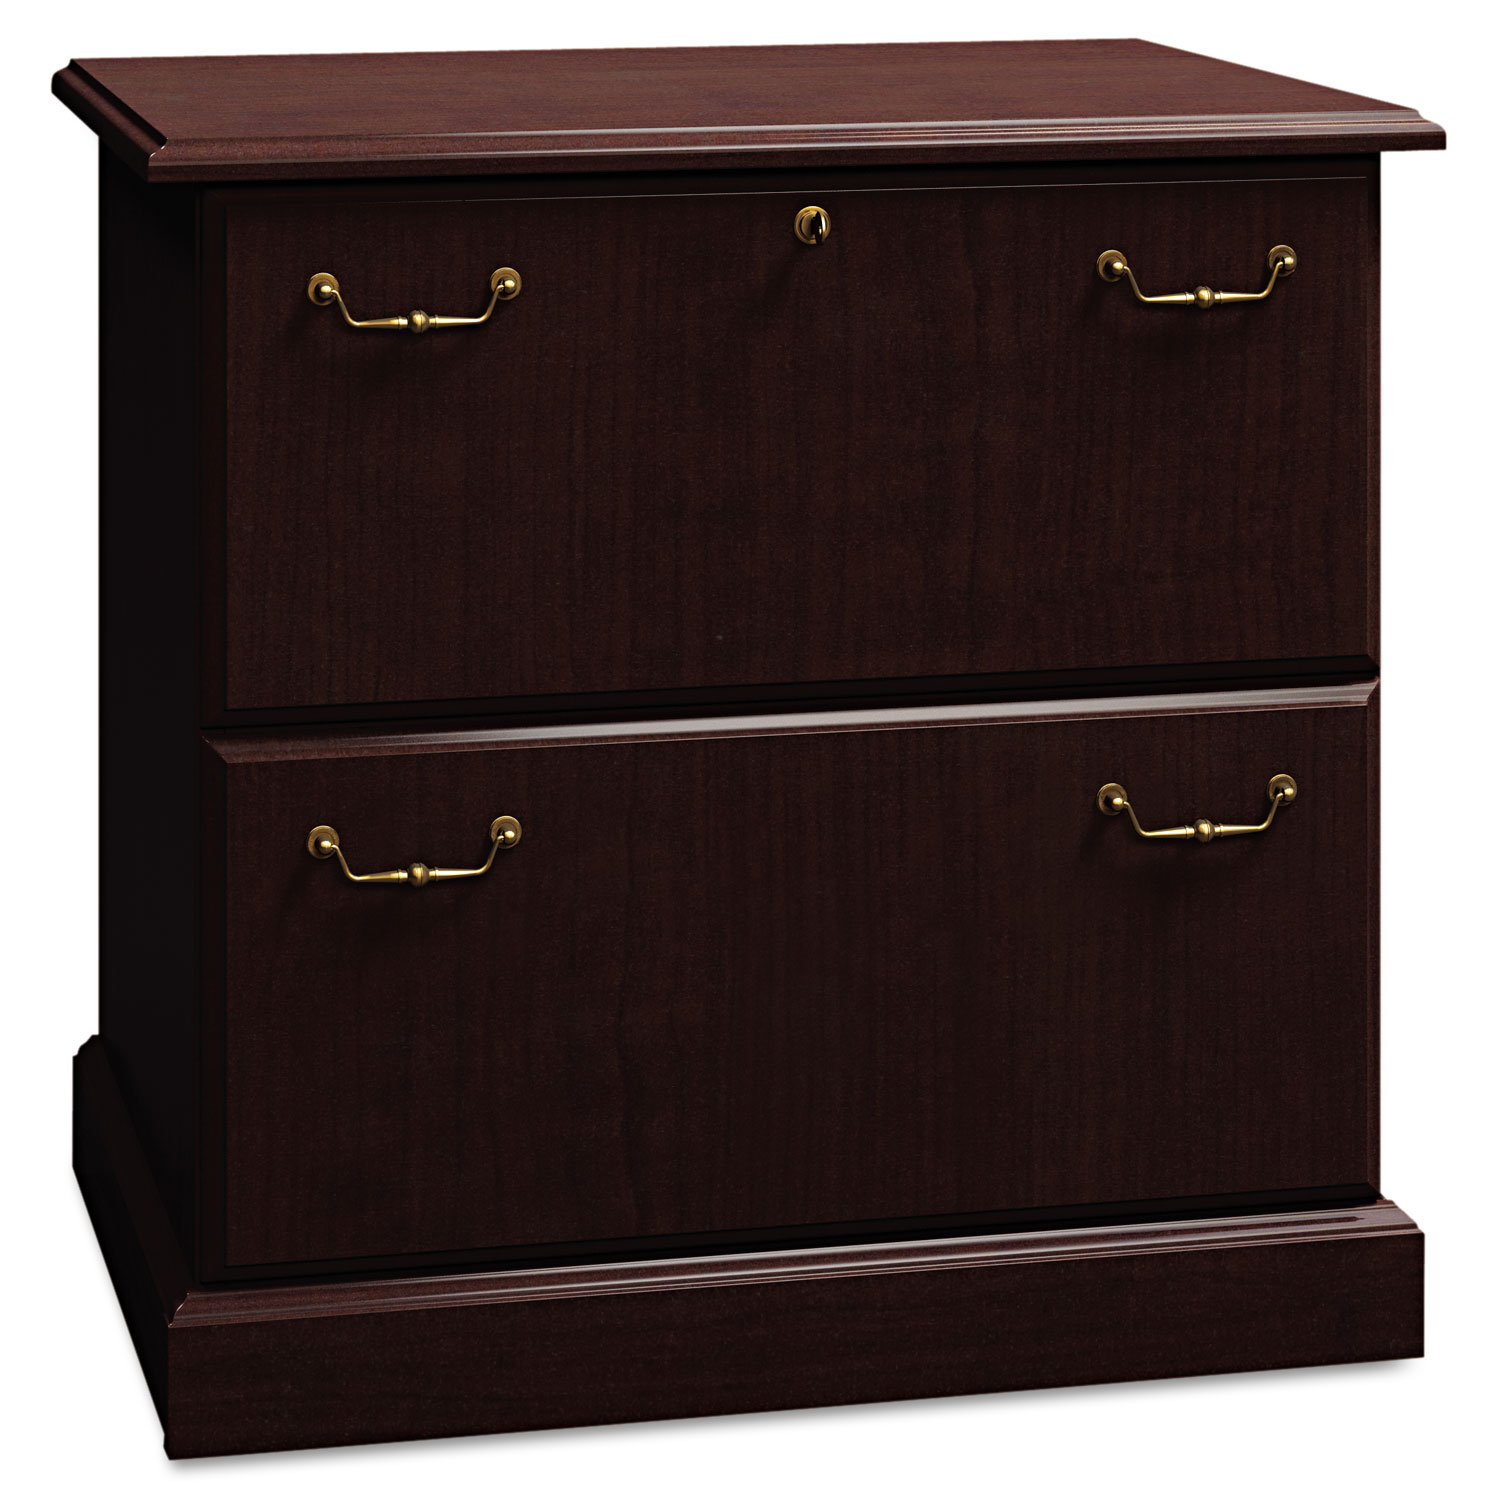 Syndicate Collection Two-Drawer Lateral File, Mocha Cherry